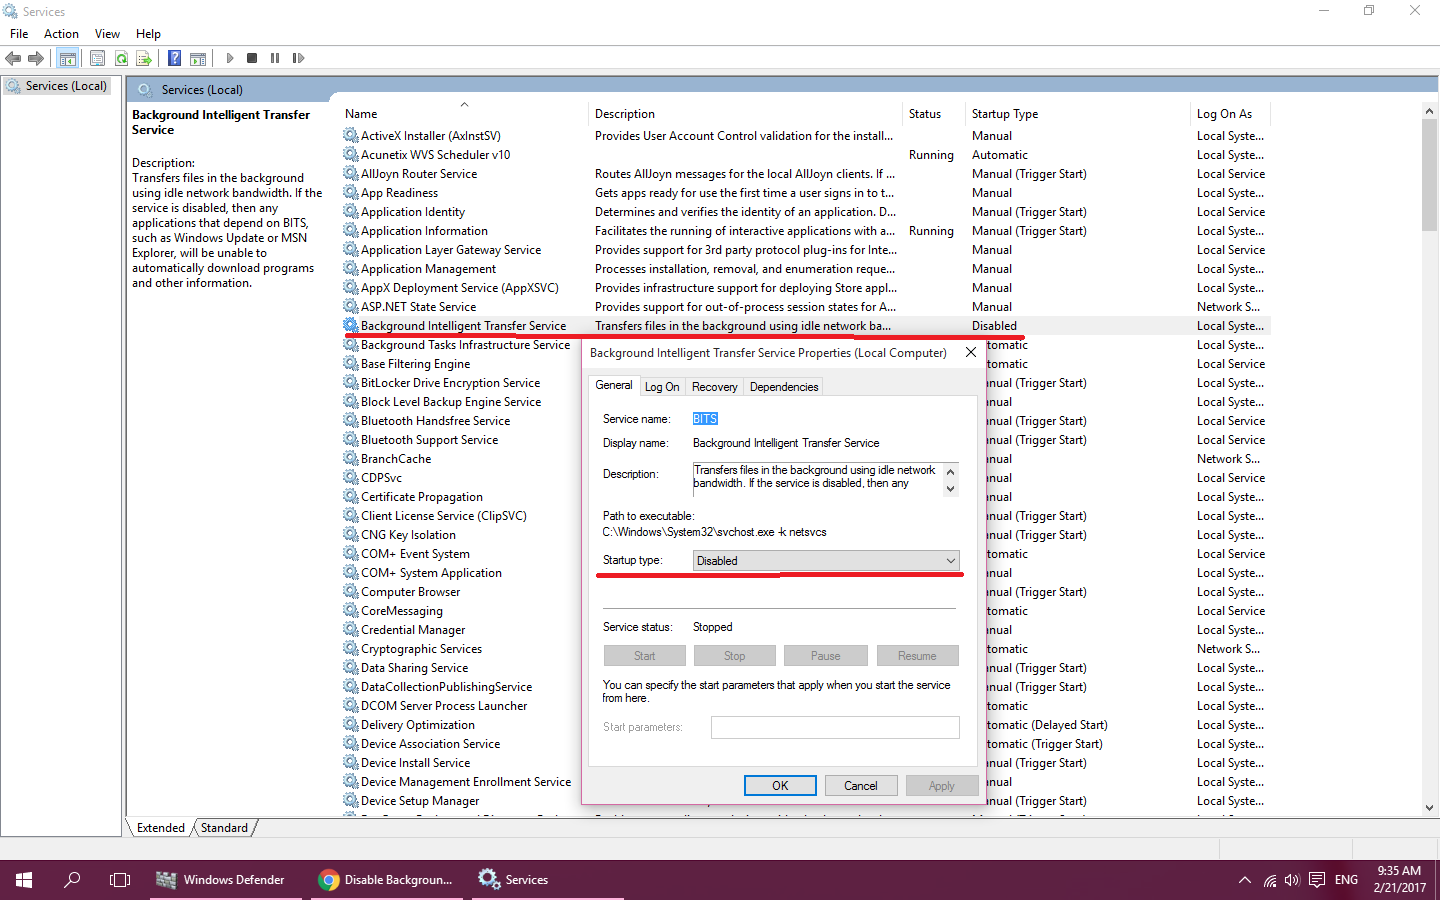 How Do I Permanently Disable Cryptographic Services in Windows 10